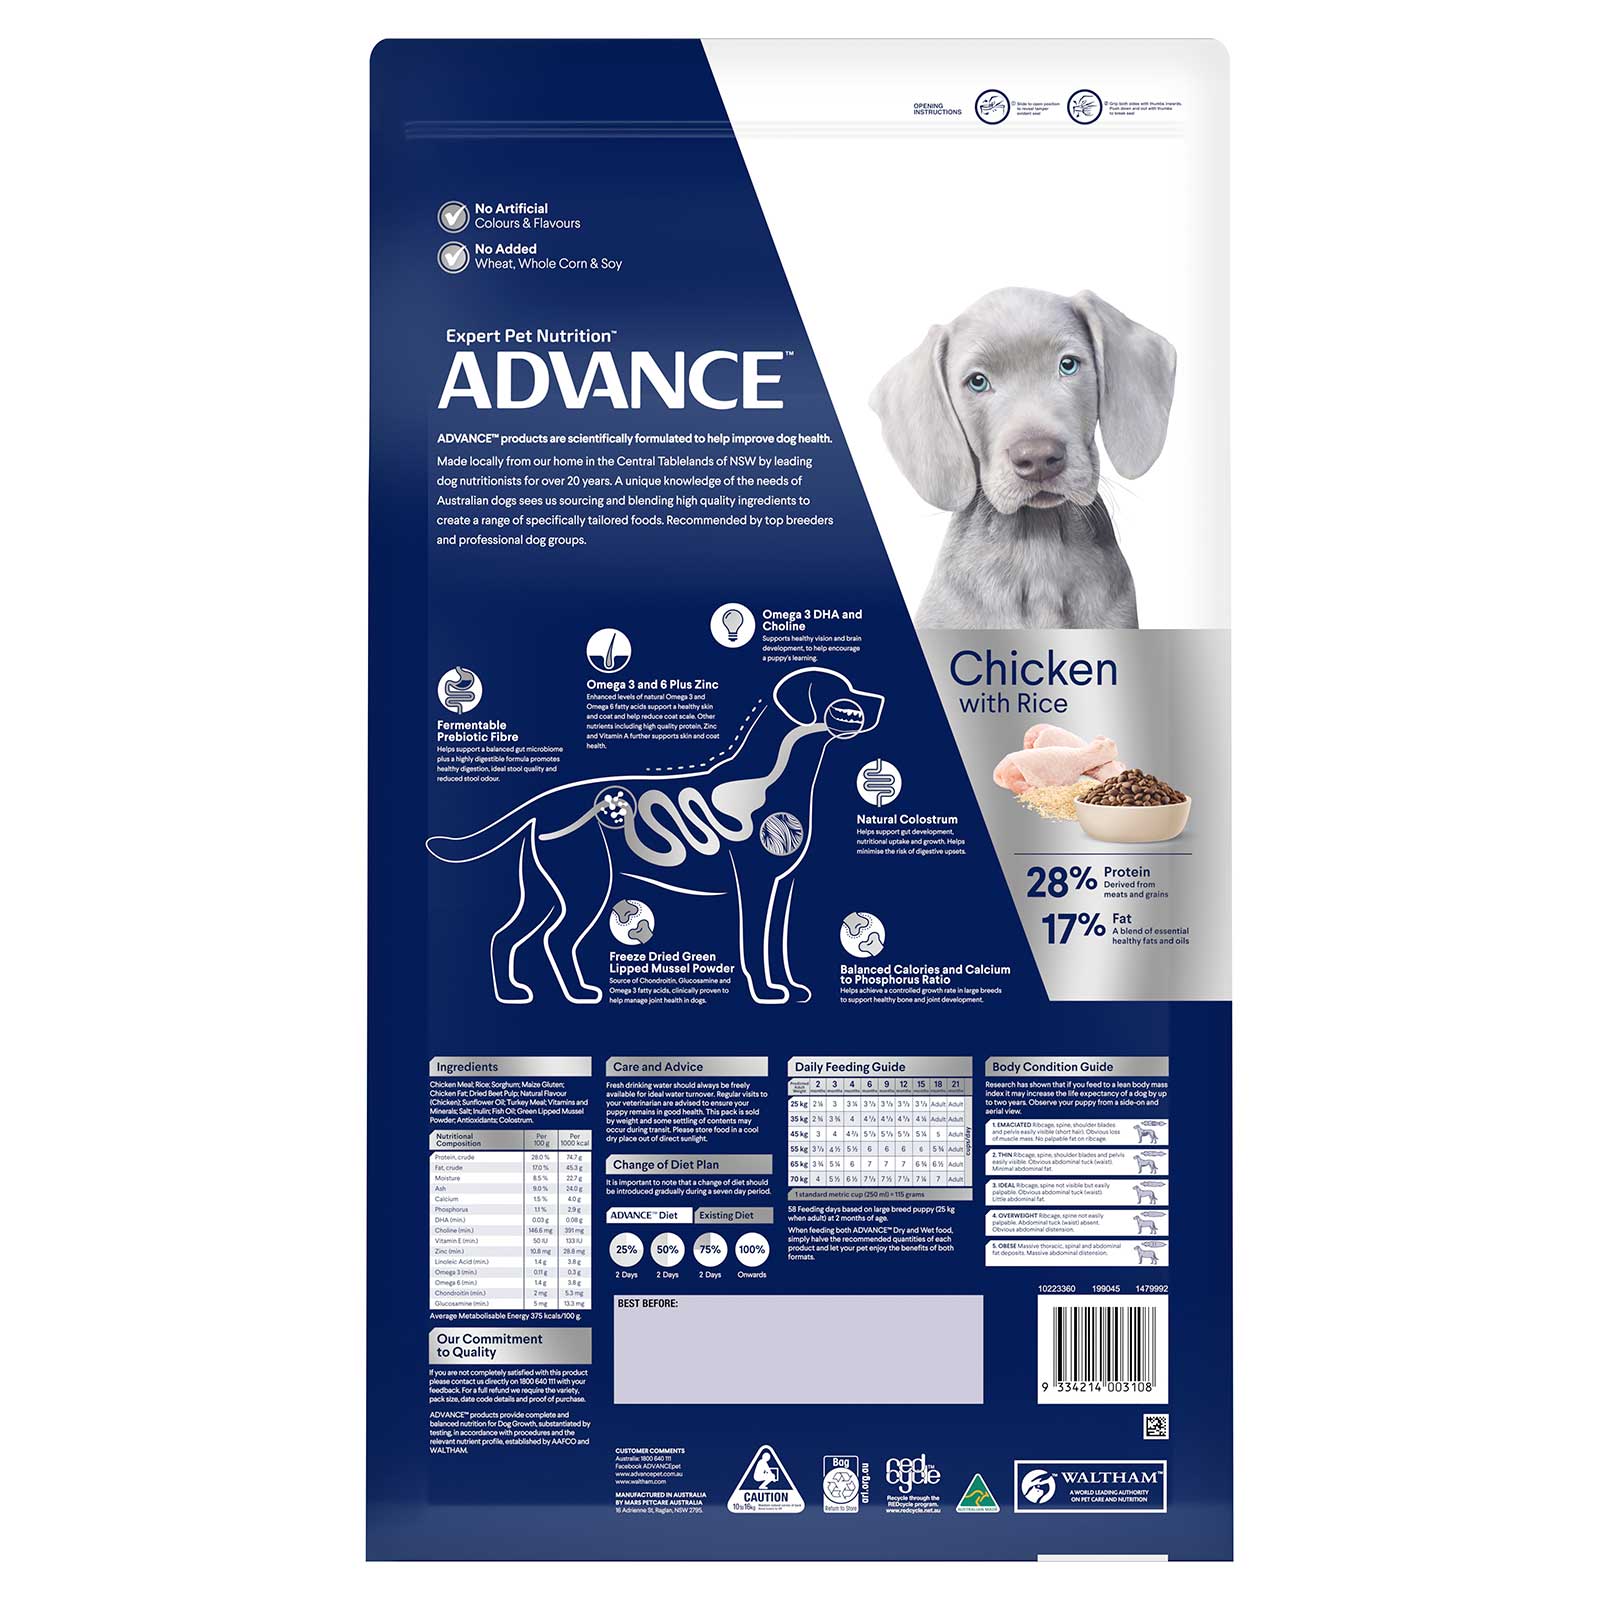 Advance Dog Food Puppy Large Breed Chicken with Rice